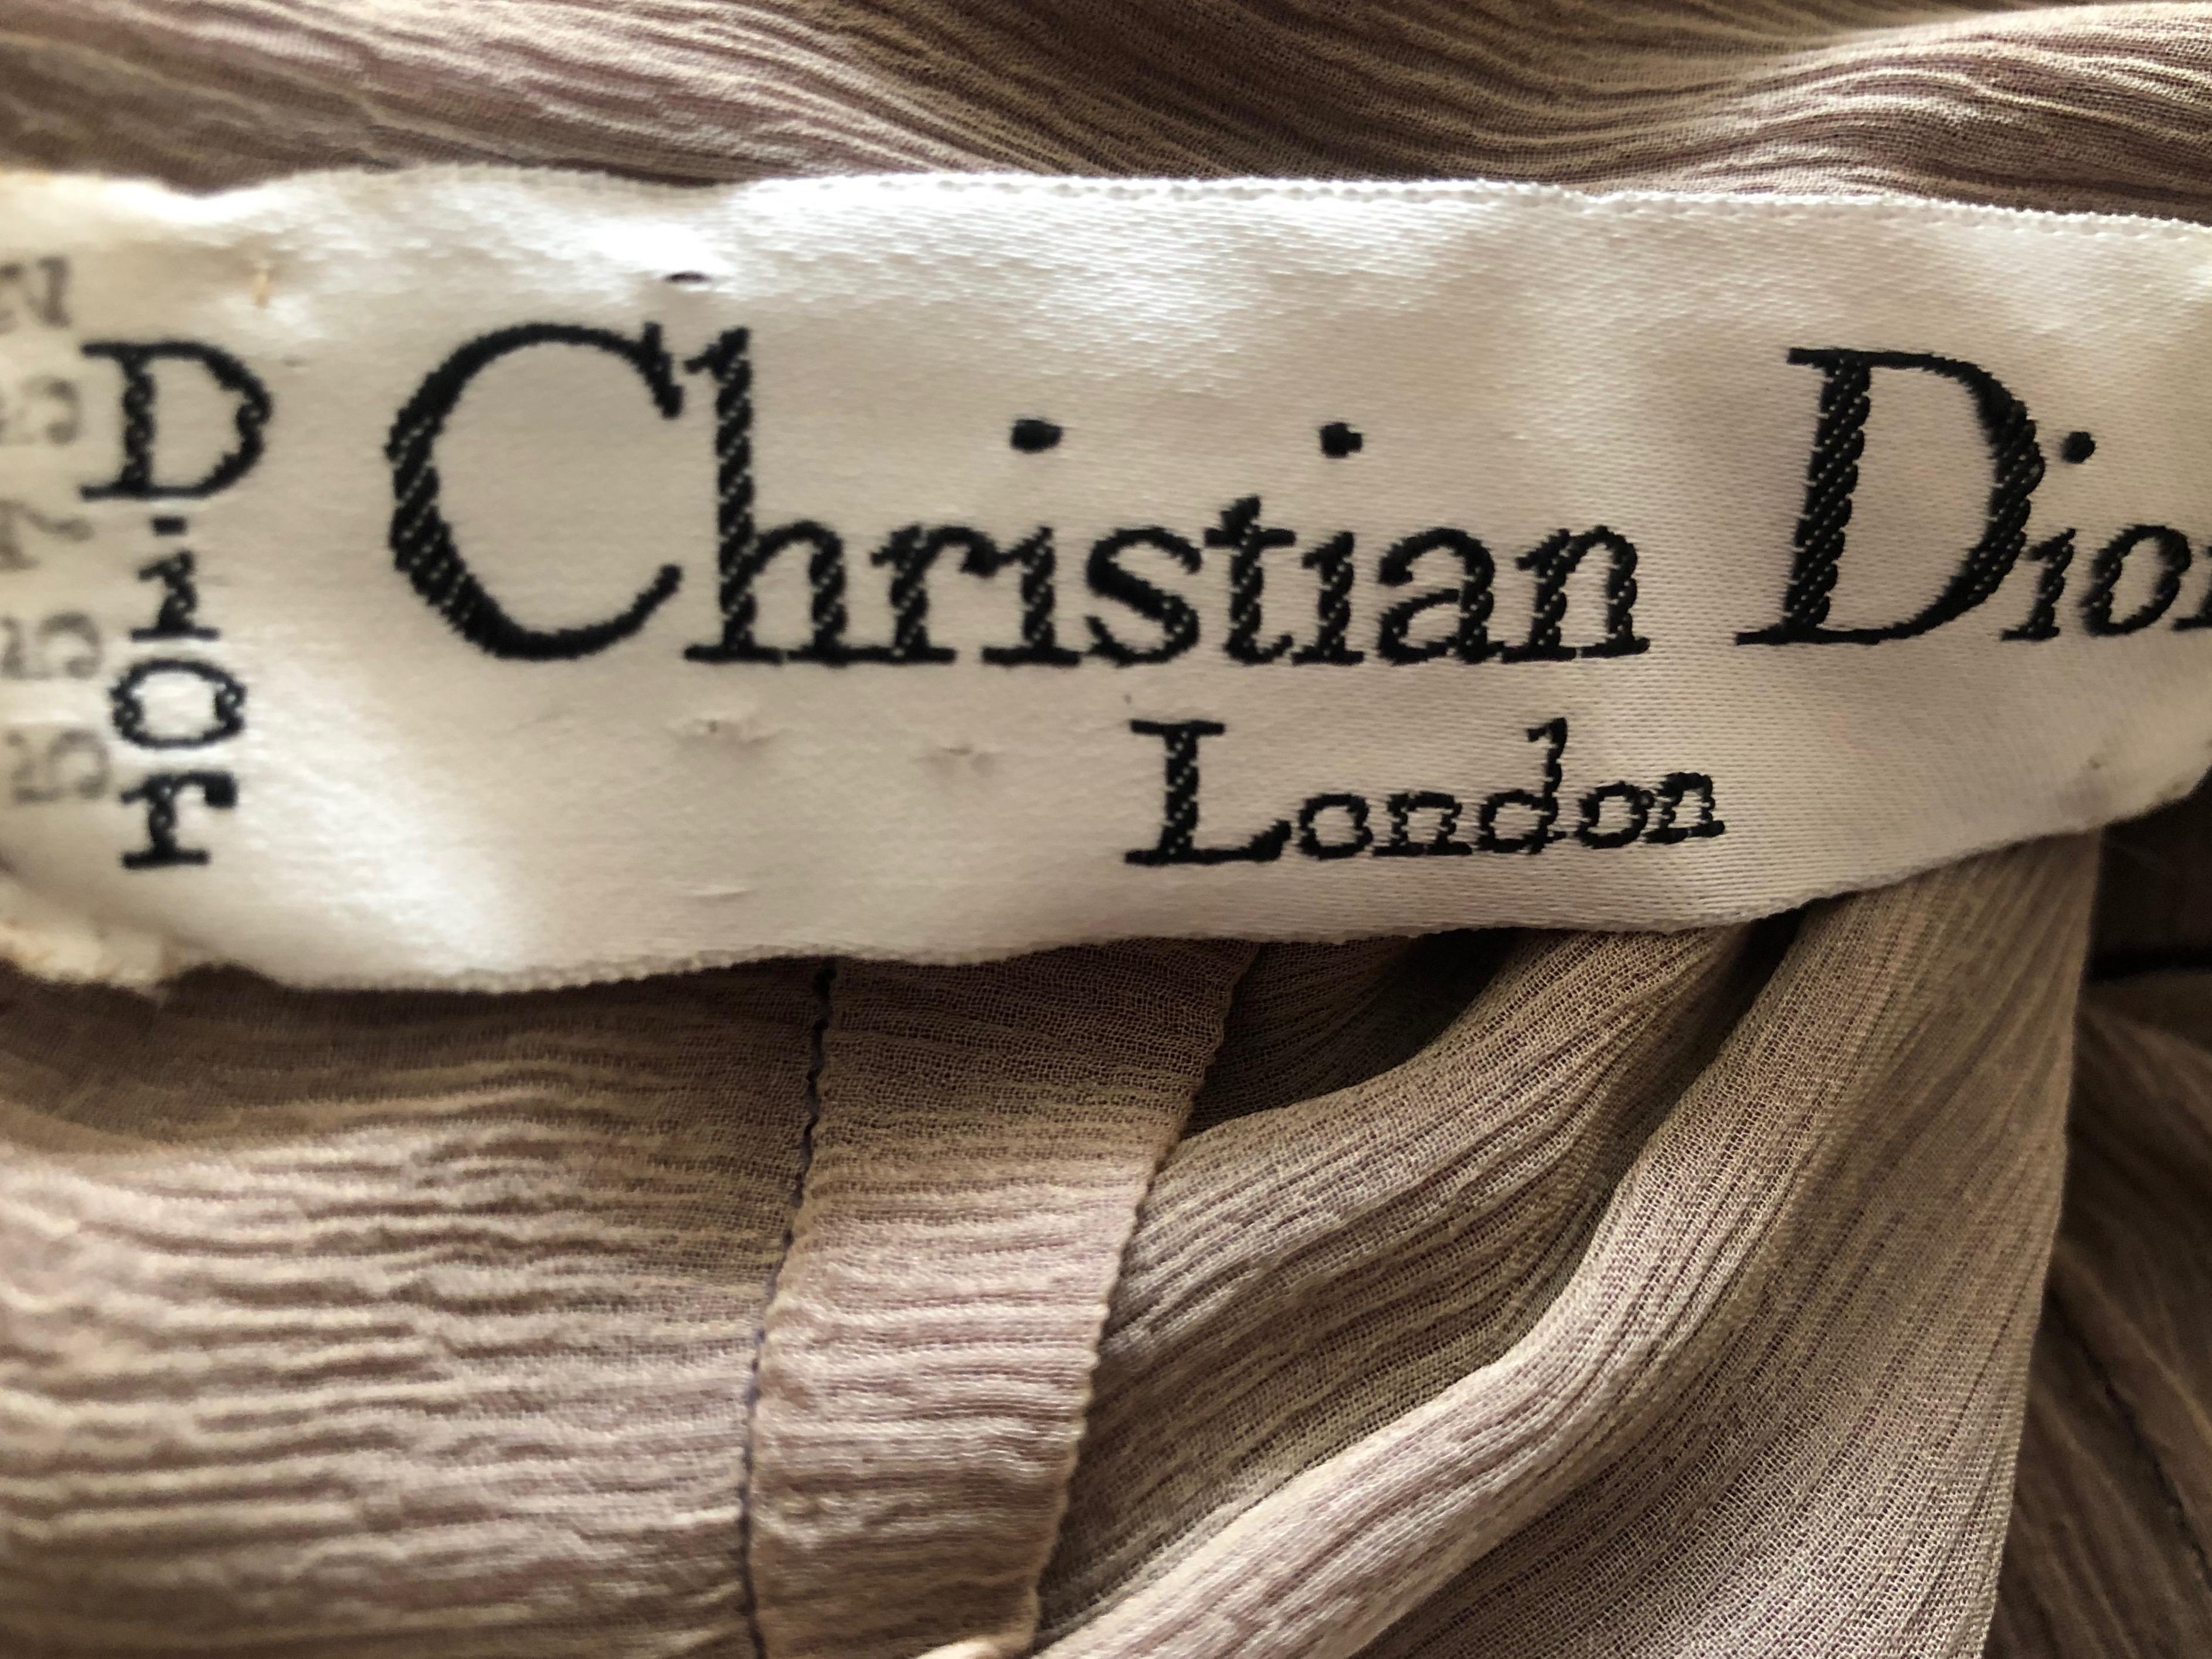 Christian Dior London 1960's Numbered Haute Couture Dress with Lesage Embellished Hemline.
So pretty, the hem is entirely embellished in beads , crystals and embroidery.
The label is numbered, it is Haute Couture.
Bust 34